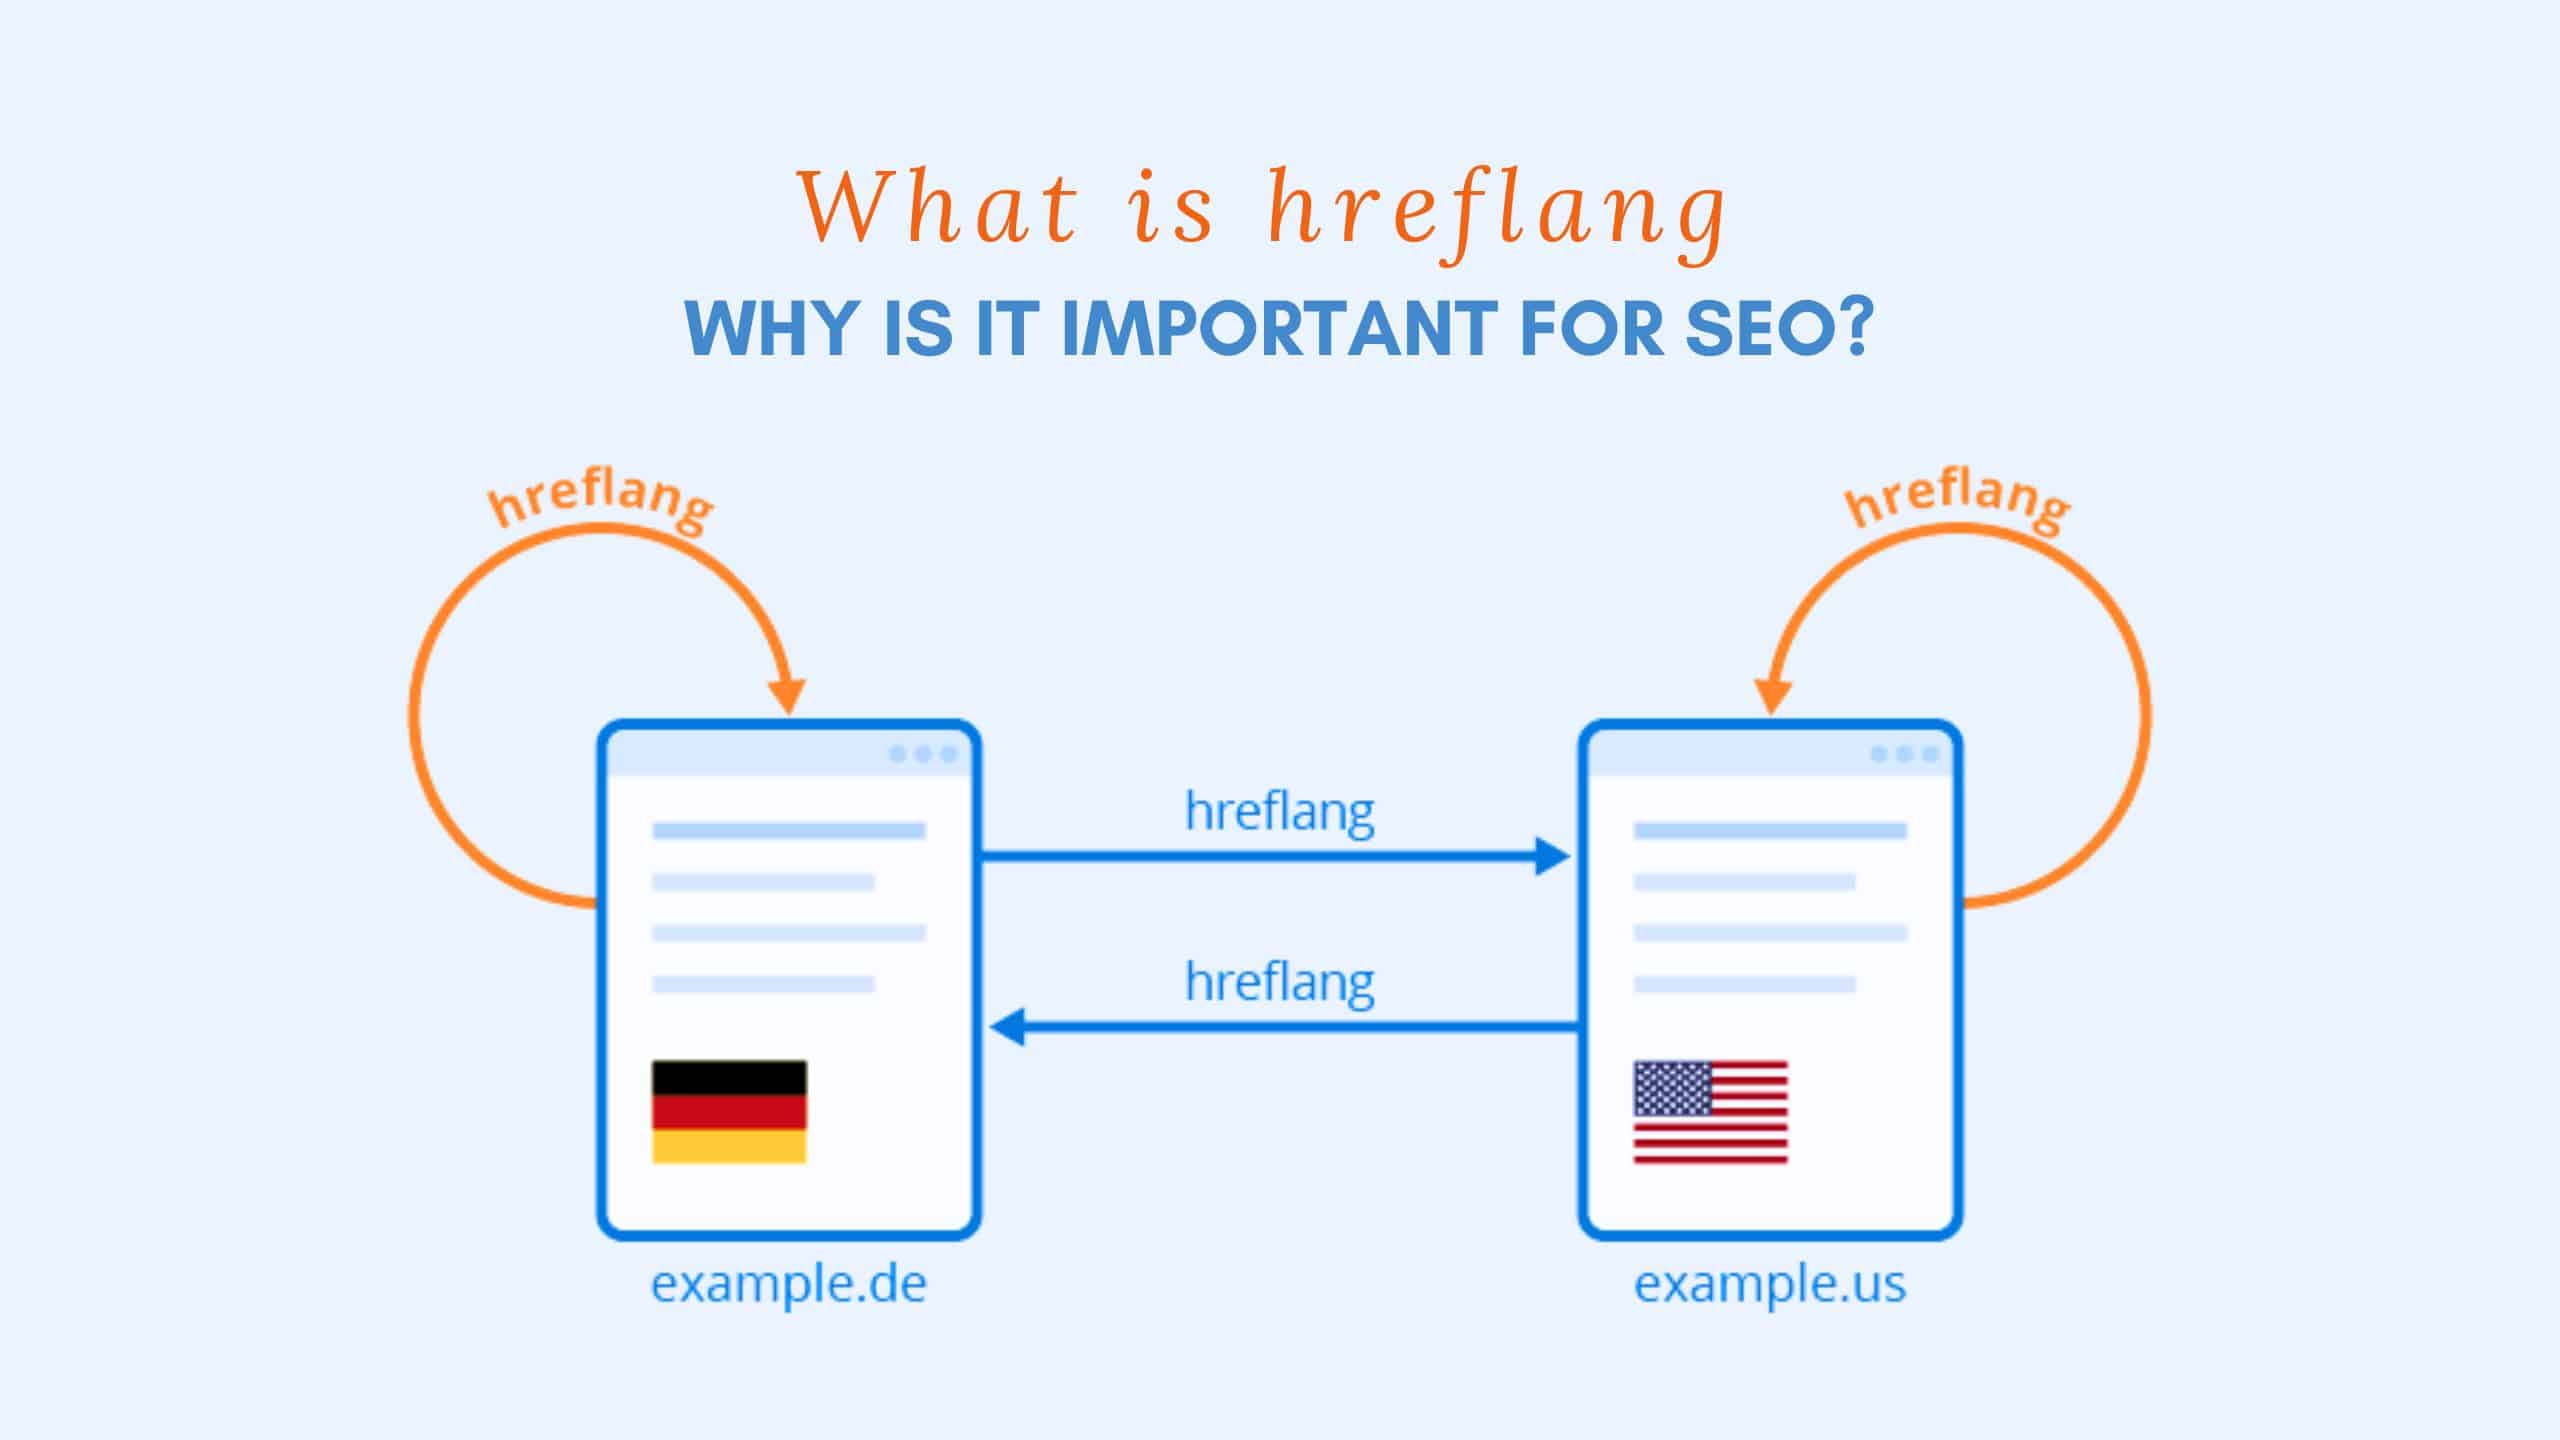 What is hreflang and why is it important for SEO?,does hreflang affect seo, how does hreflang affect seo, how important is hreflang for seo, hreflang error seo, hreflang generator, hreflang important seo, hreflang links seo, hreflang seo check, hreflang seo meta tag, hreflang seo questions, hreflang tag seo, Hreflang Tags, seo check hreflang, seo hreflang usage, seo-hreflang, seo-hreflang.com, what are hreflang tags, what is hreflang, What is hreflang and why is it important for SEO?, what is hreflang in seo, why hreflang important for seo